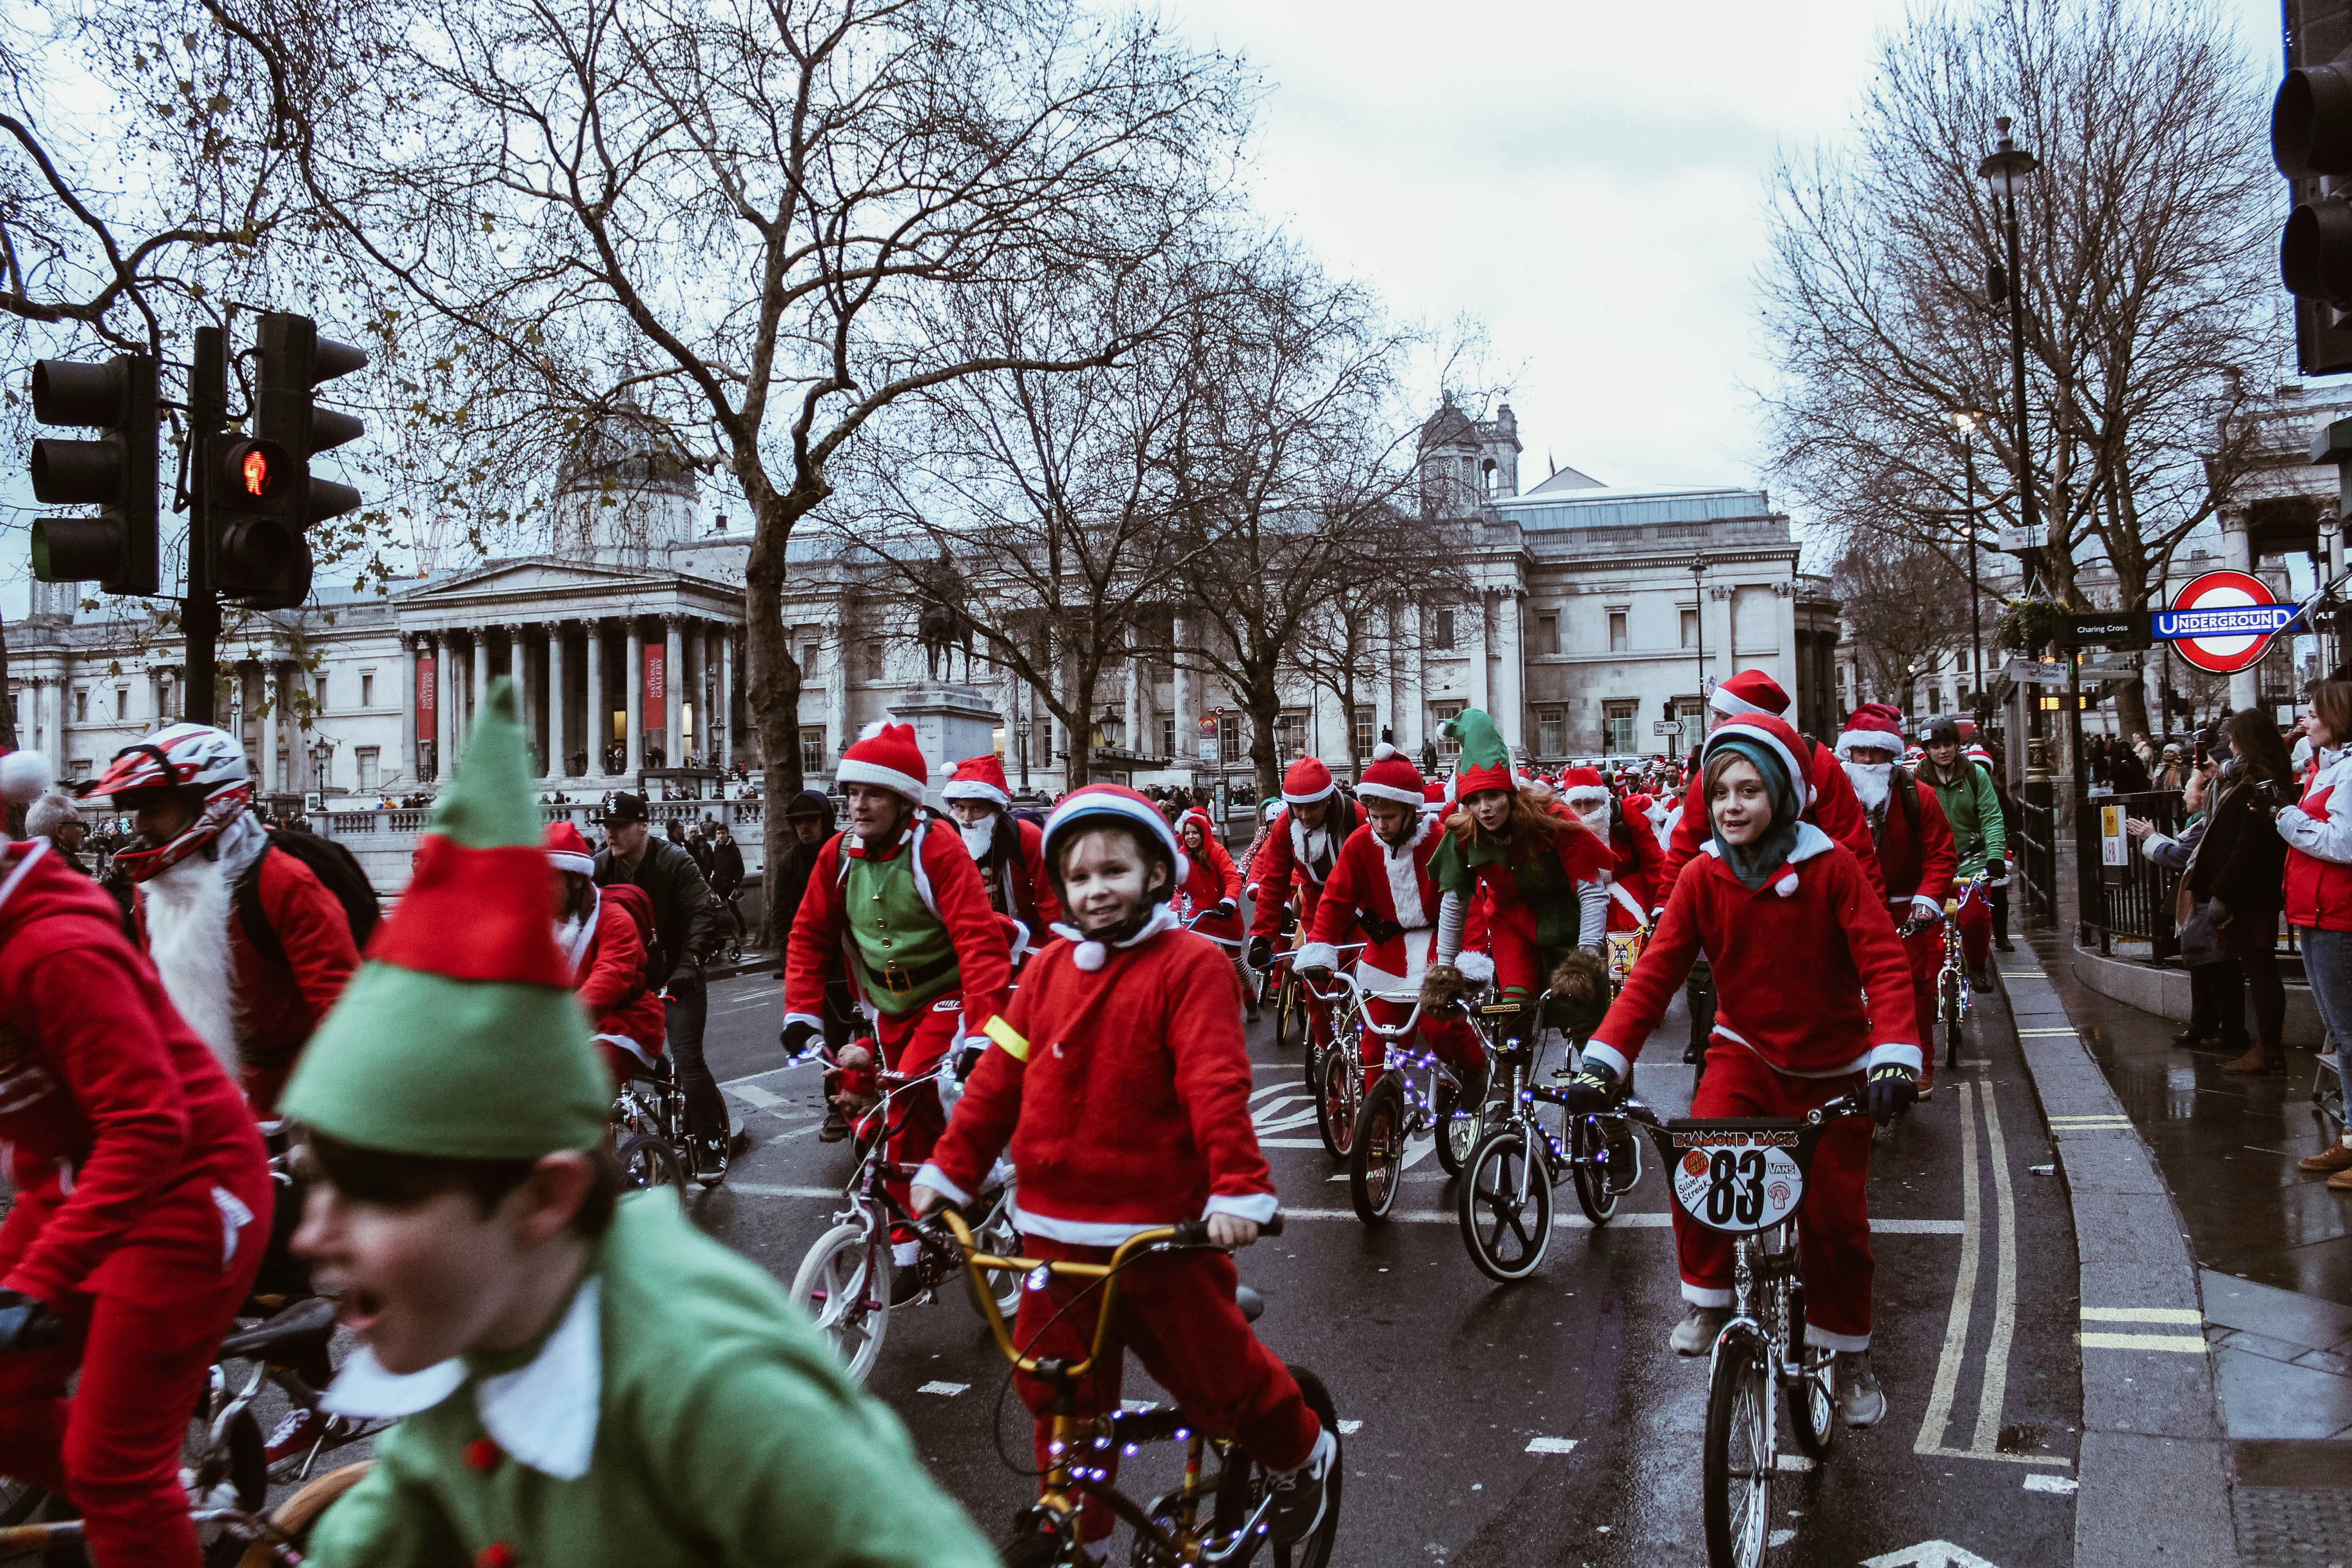 While looking for our bus stop we ended up running into a sea of Santa’s riding for a children’s charity!